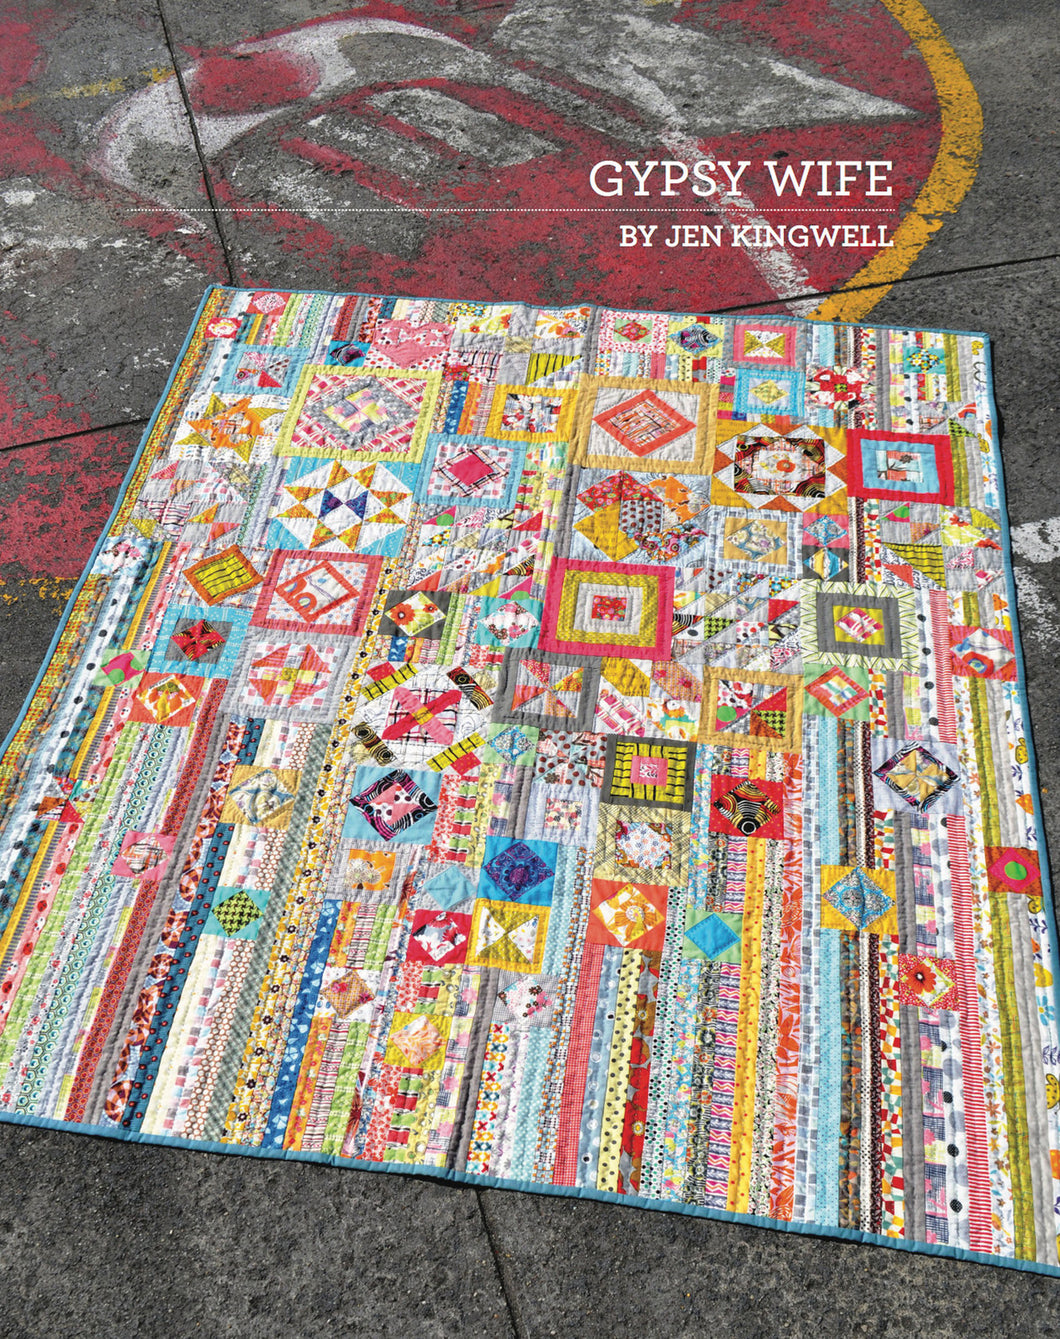 Wanderer's Wife (Previously Gypsy Wife) Booklet - Jen Kingwell